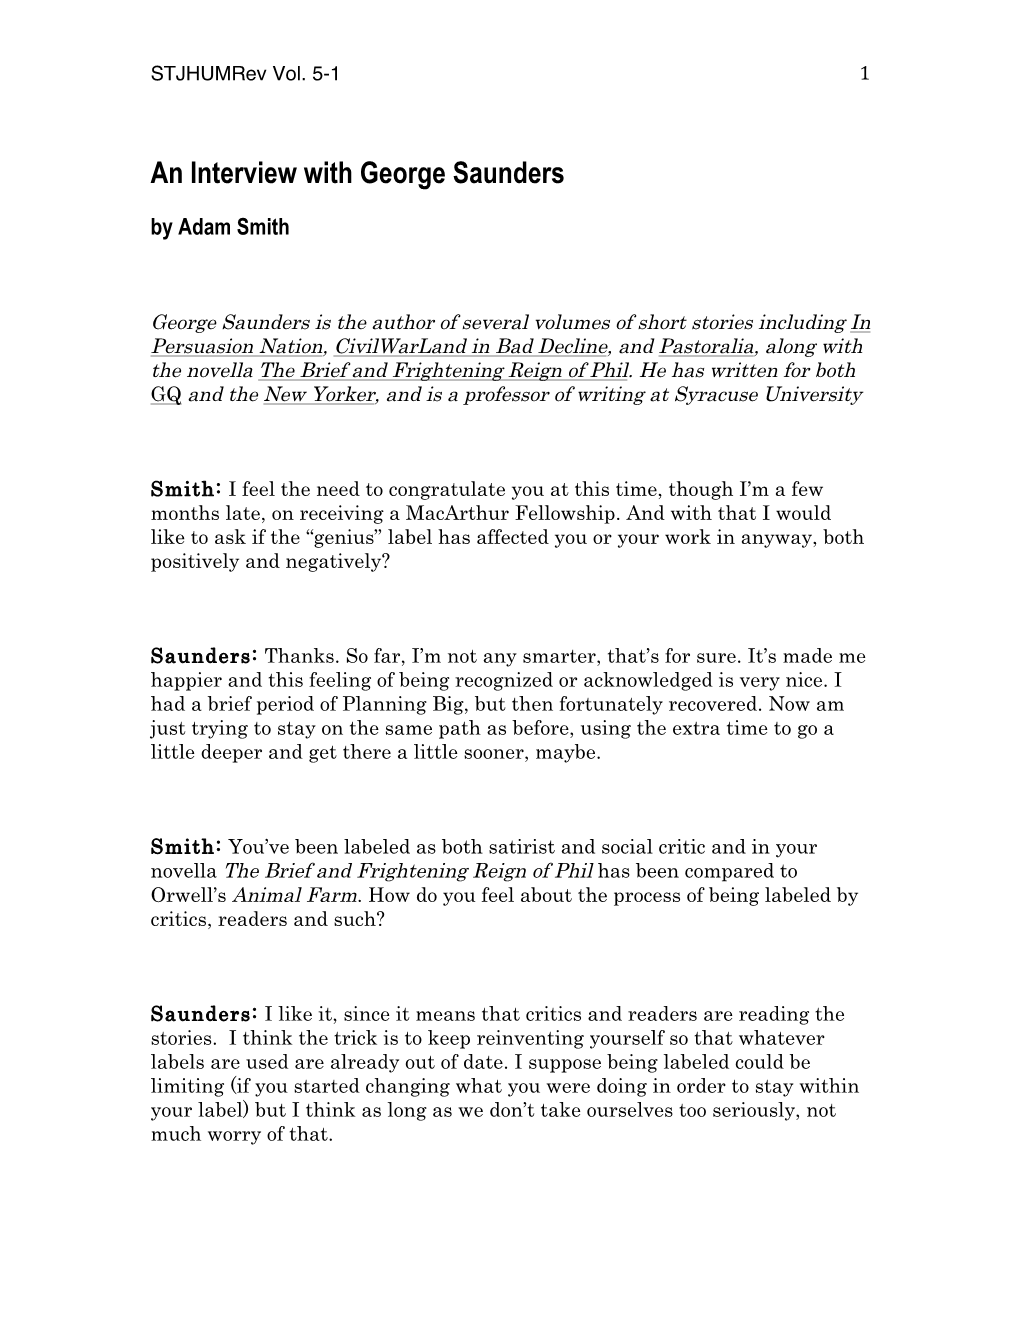 An Interview with George Saunders by Adam Smith